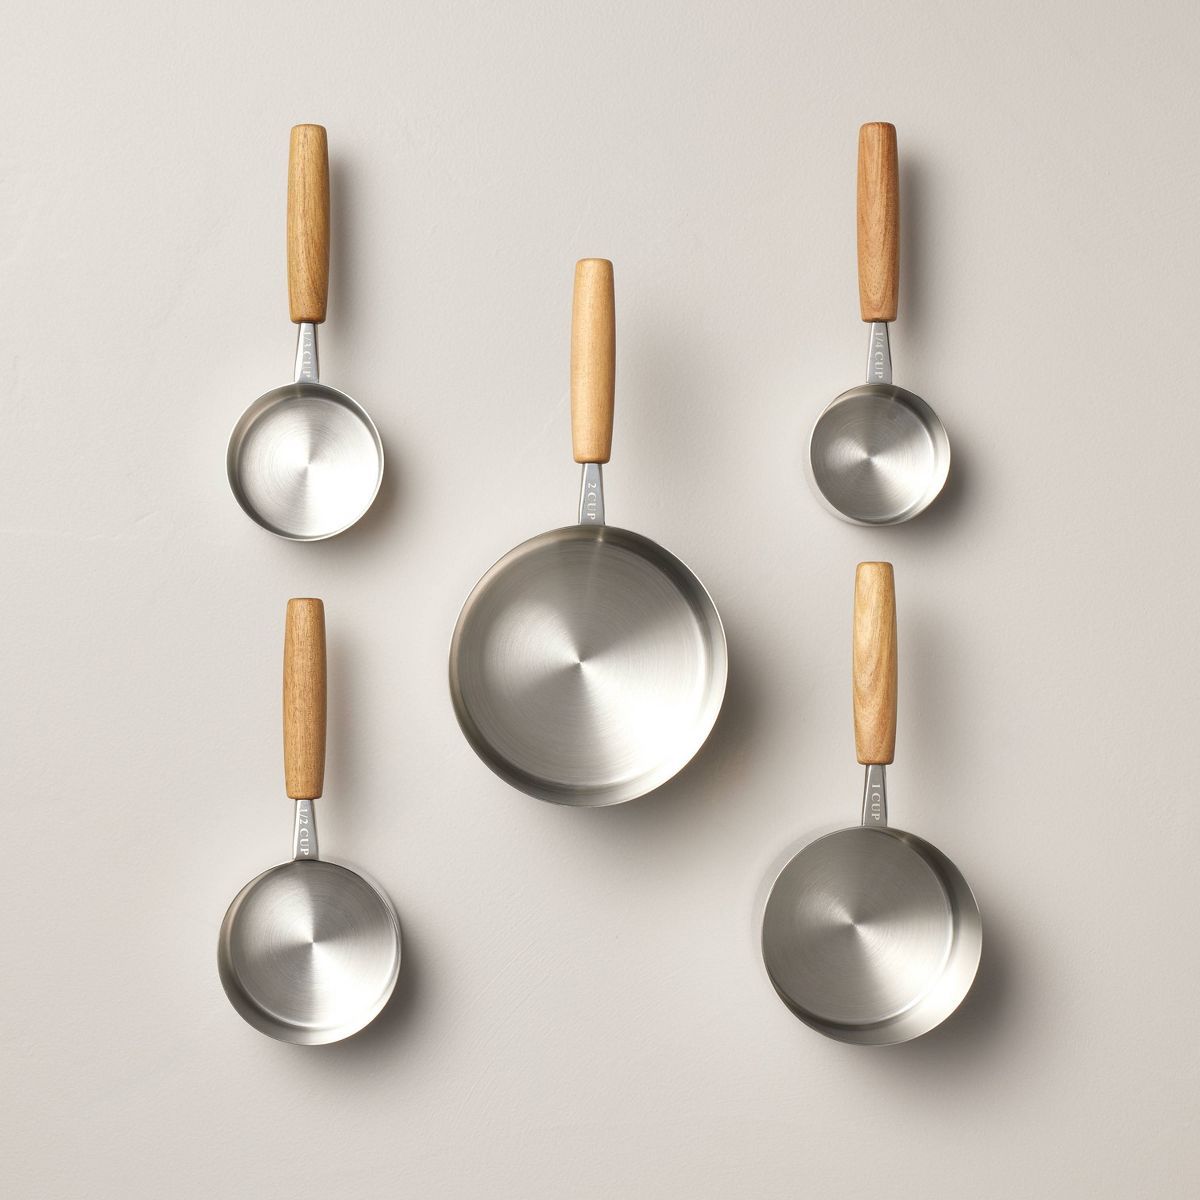 5pc Wood & Stainless Steel Measuring Cups - Hearth & Hand™ with Magnolia | Target